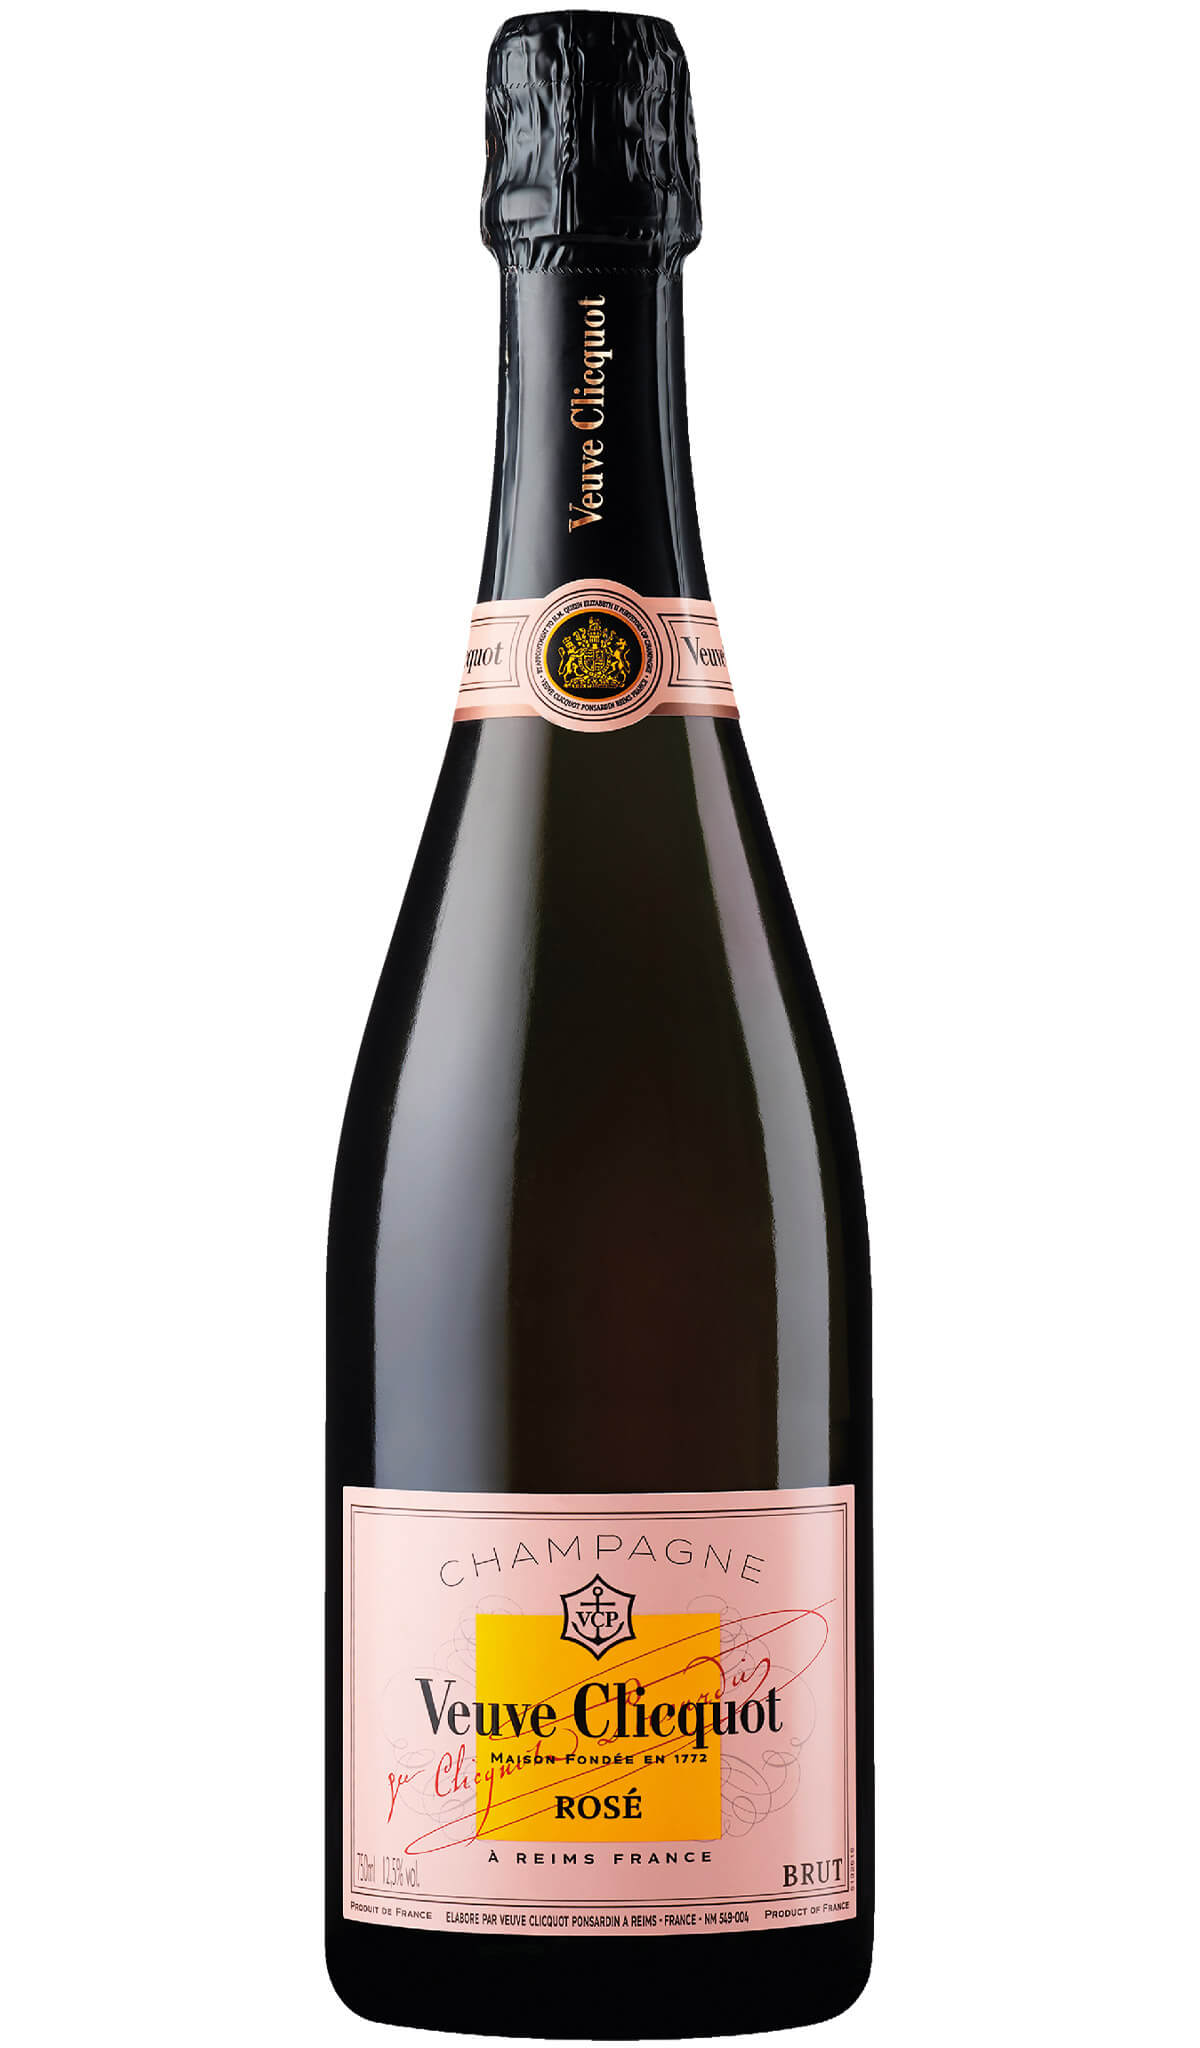 Find out more or buy Veuve Clicquot Rosé 750ml (Champagne, France) online at Wine Sellers Direct - Australia’s independent liquor specialists.